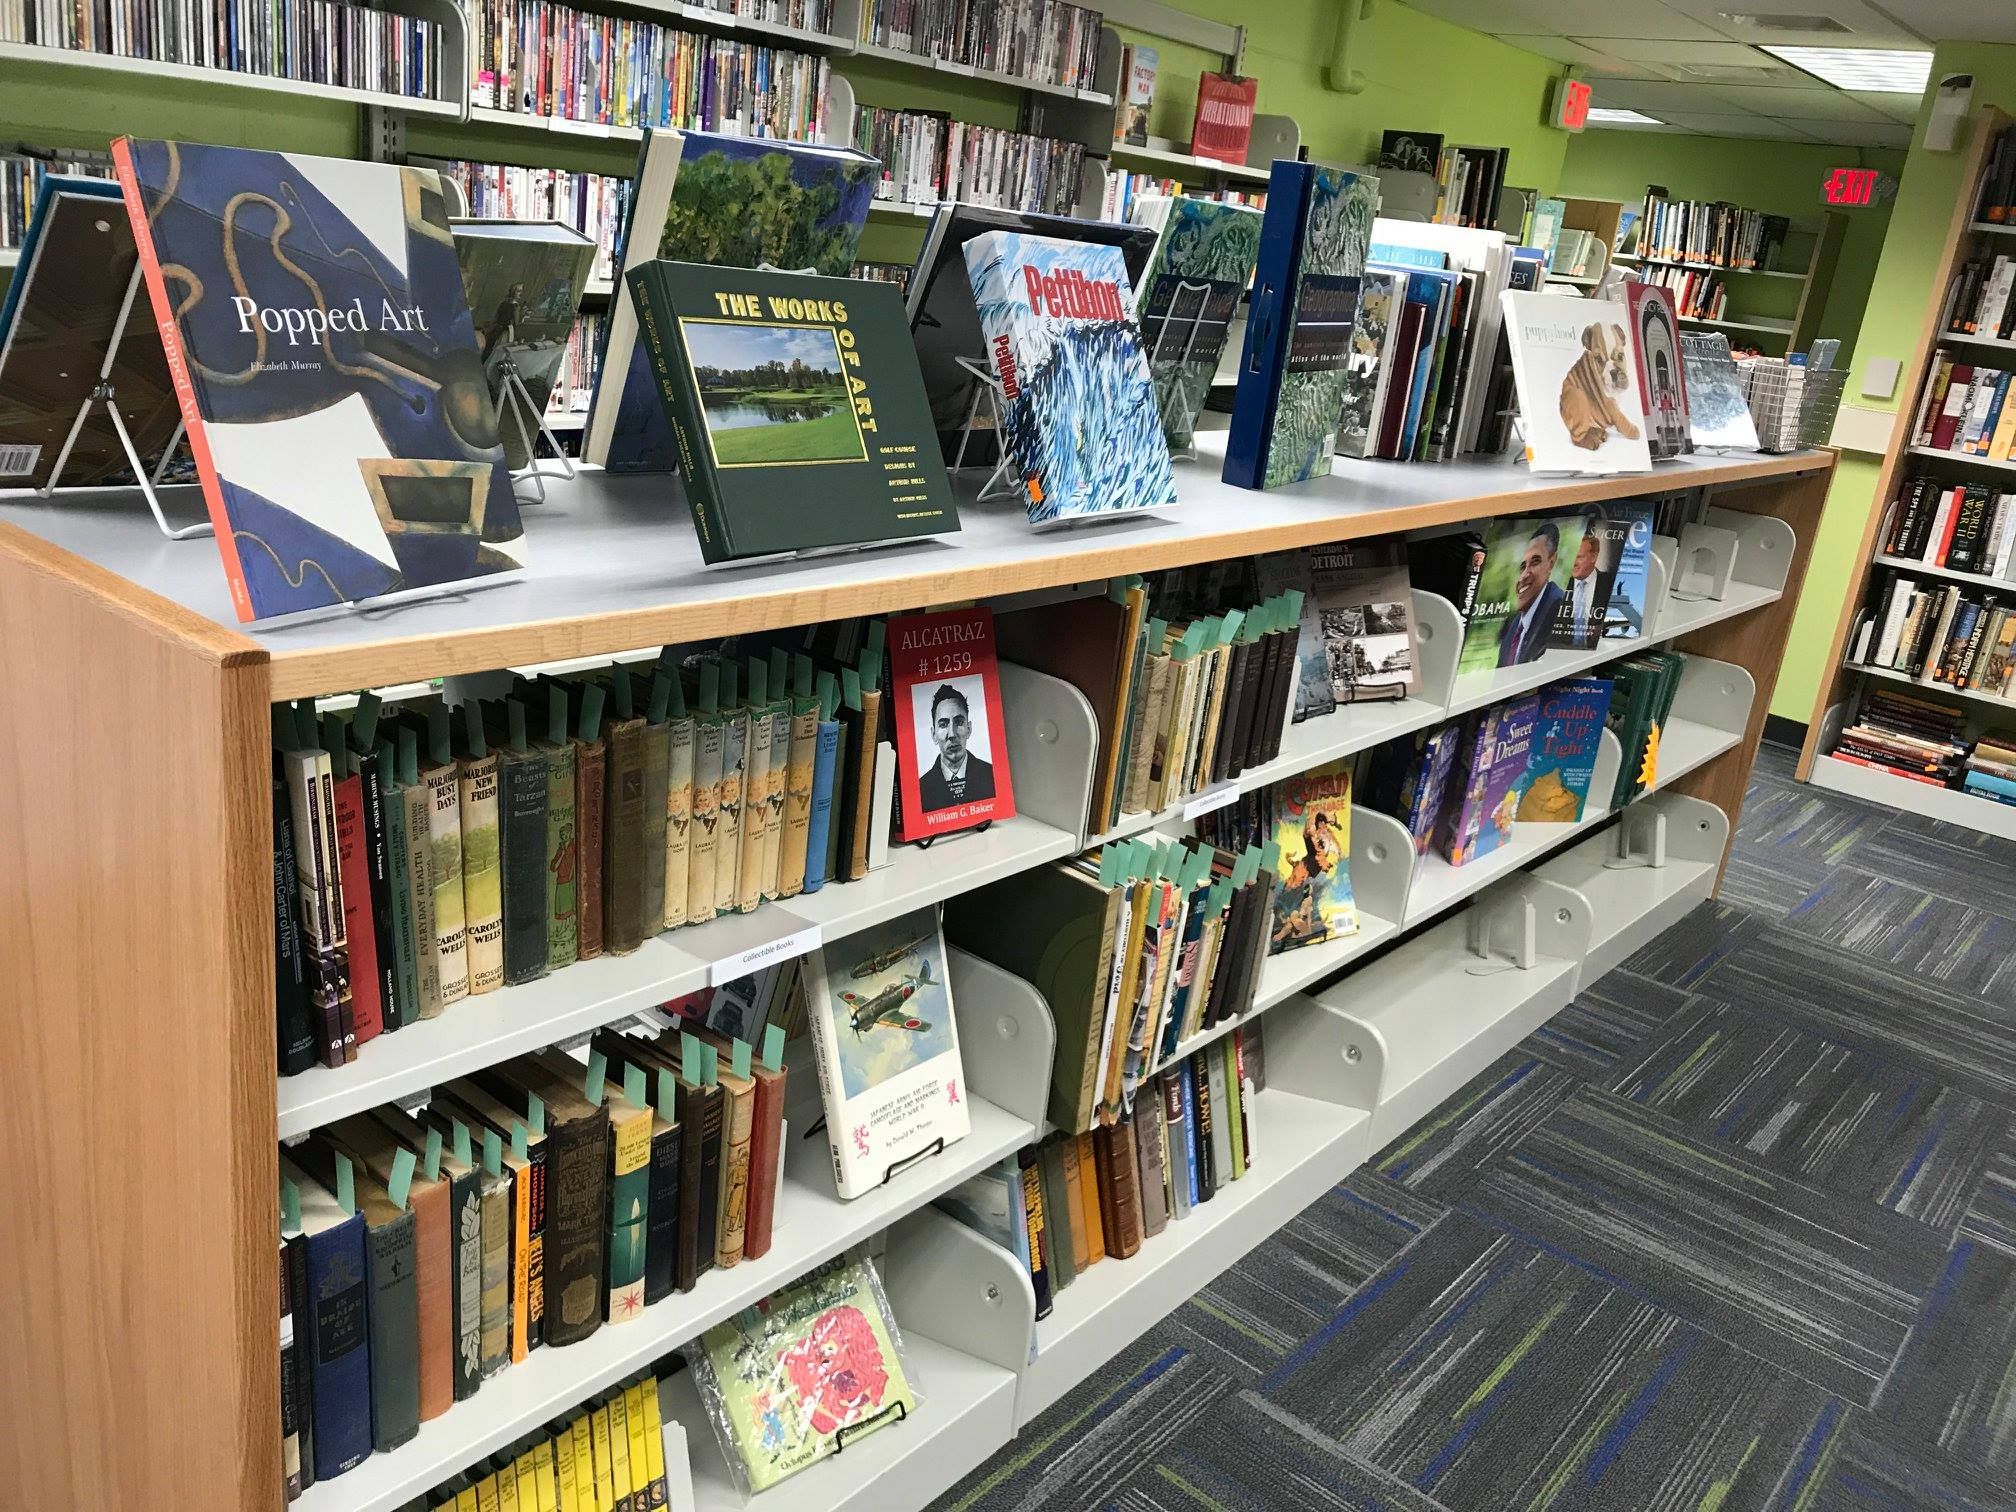 Our lower level Book Shop is re-opened!